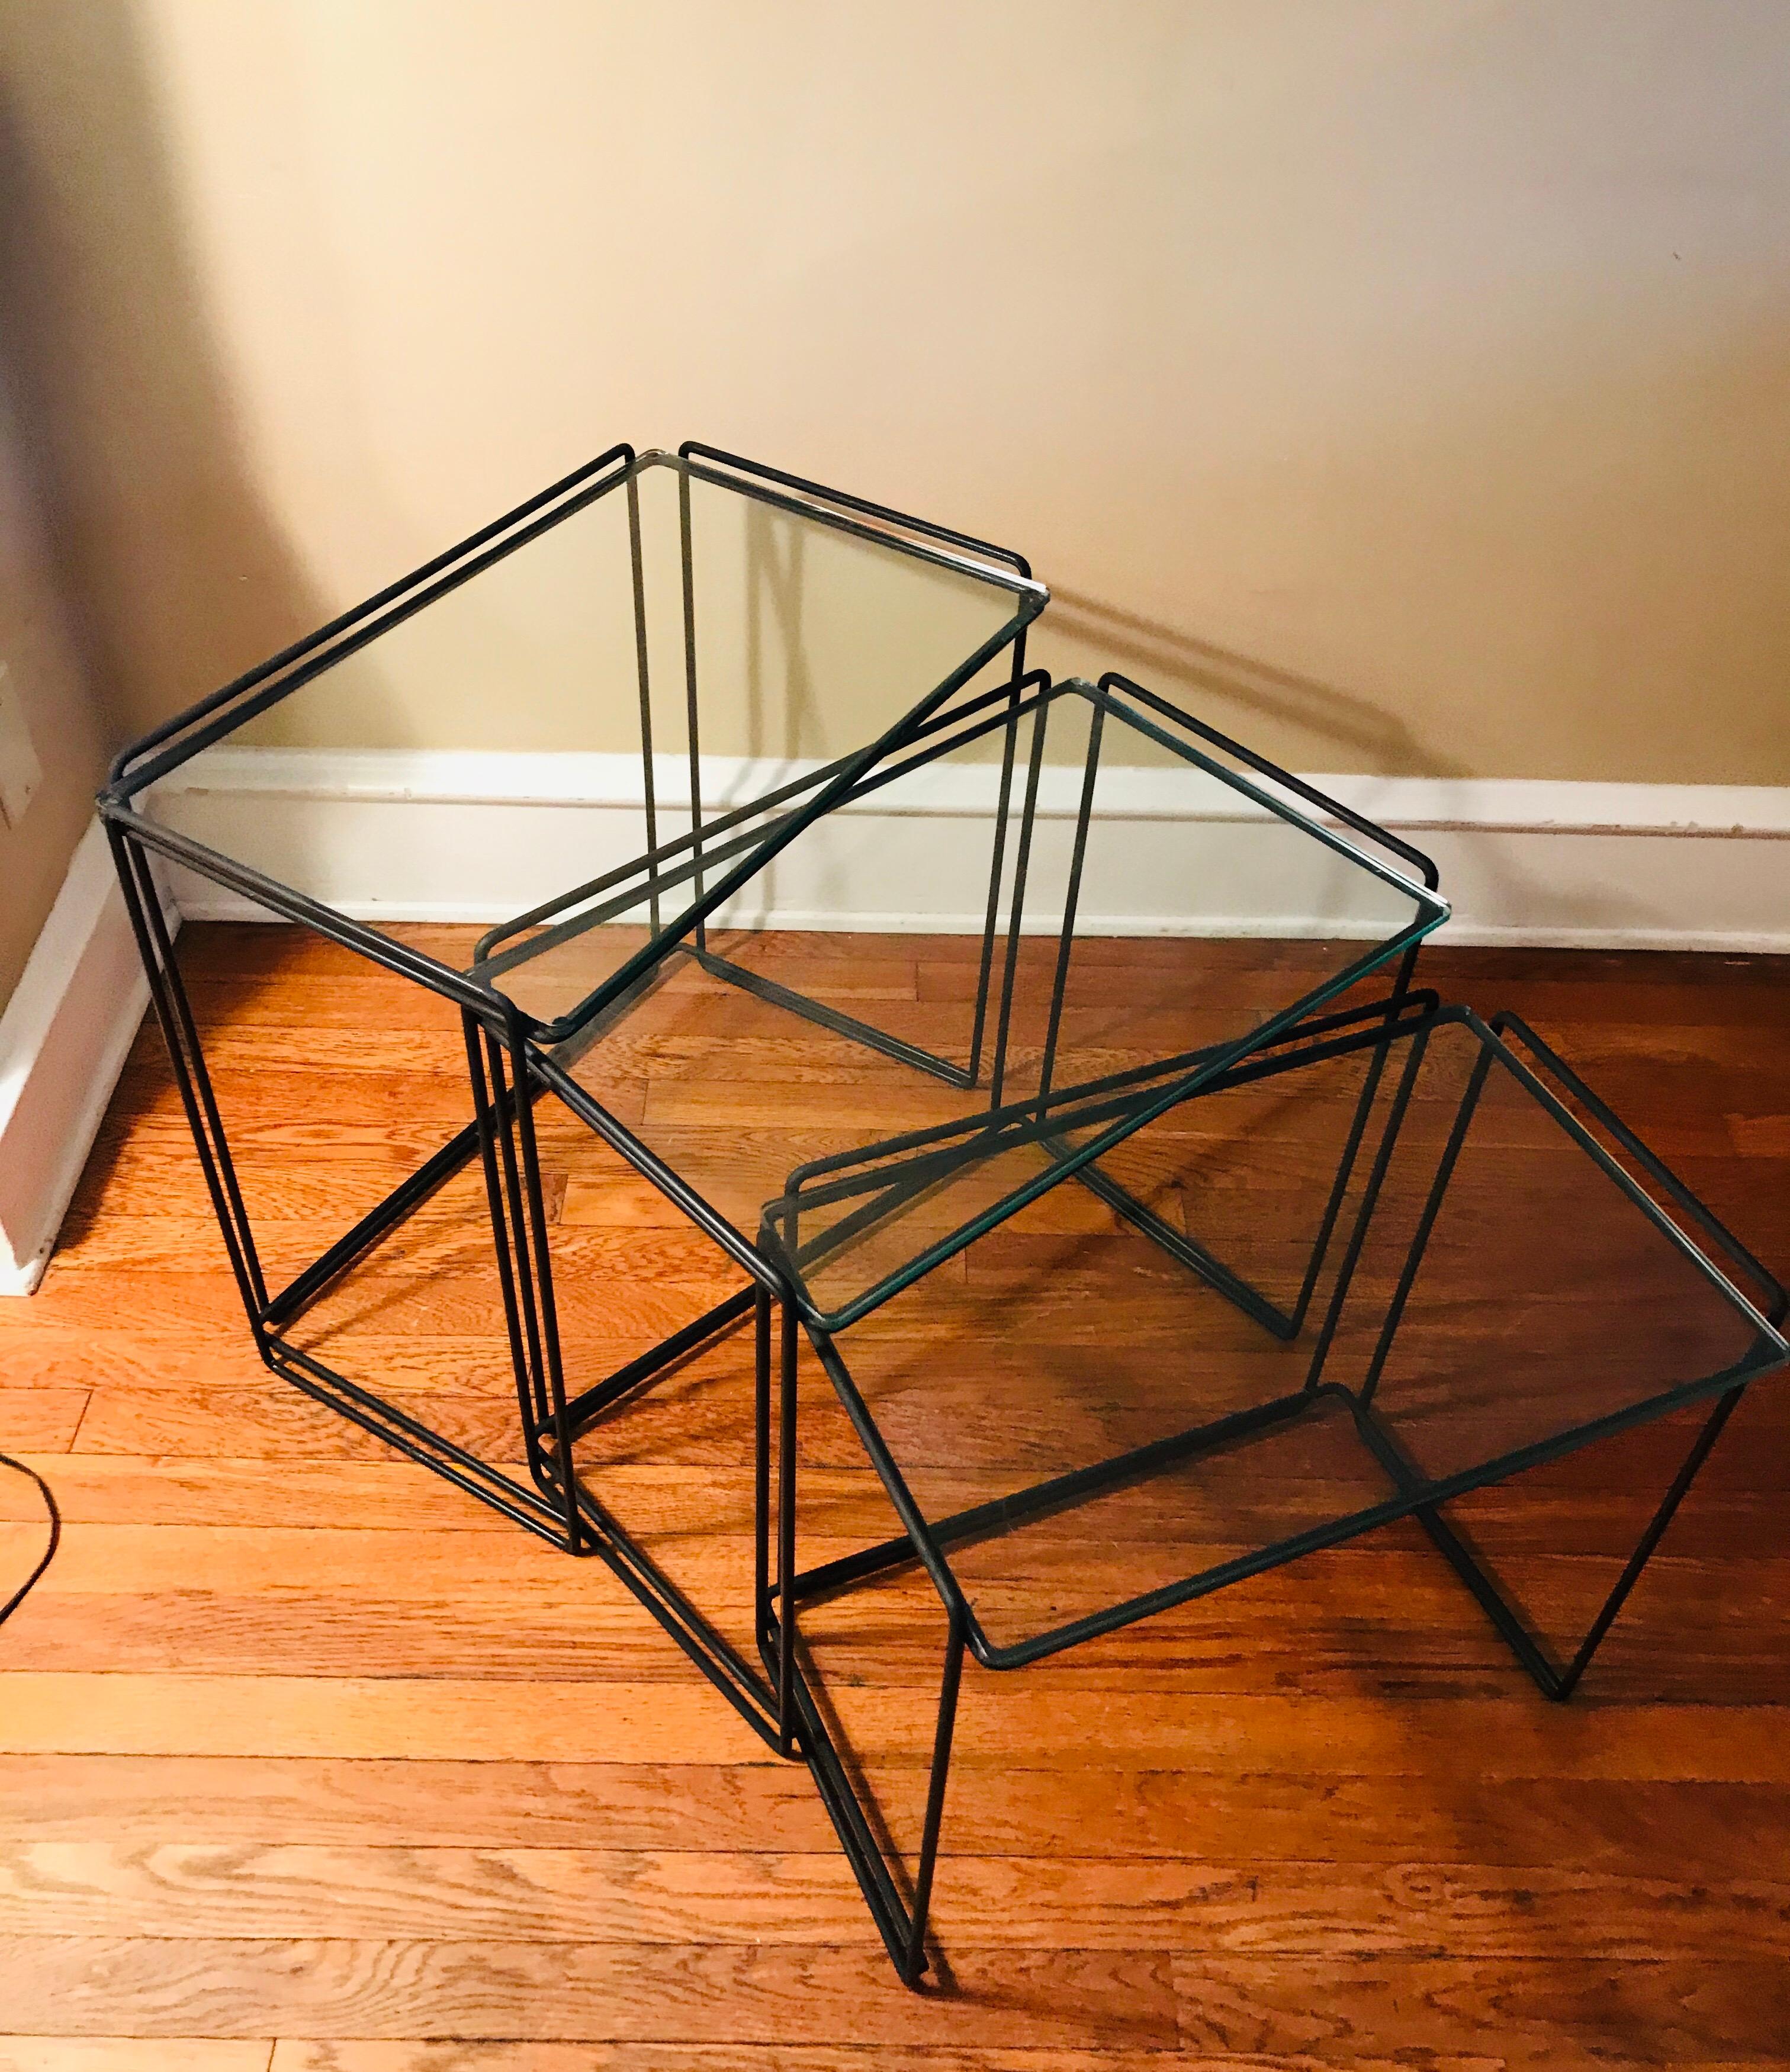 Pair of Minimalist cocktail side tables designed by French designer Max Sauze. 

Manufactured for Attrow, circa 1960s. 

Simple design with welded black wrought iron and glass. 

I would say this is an early example of Post-modernism, despite